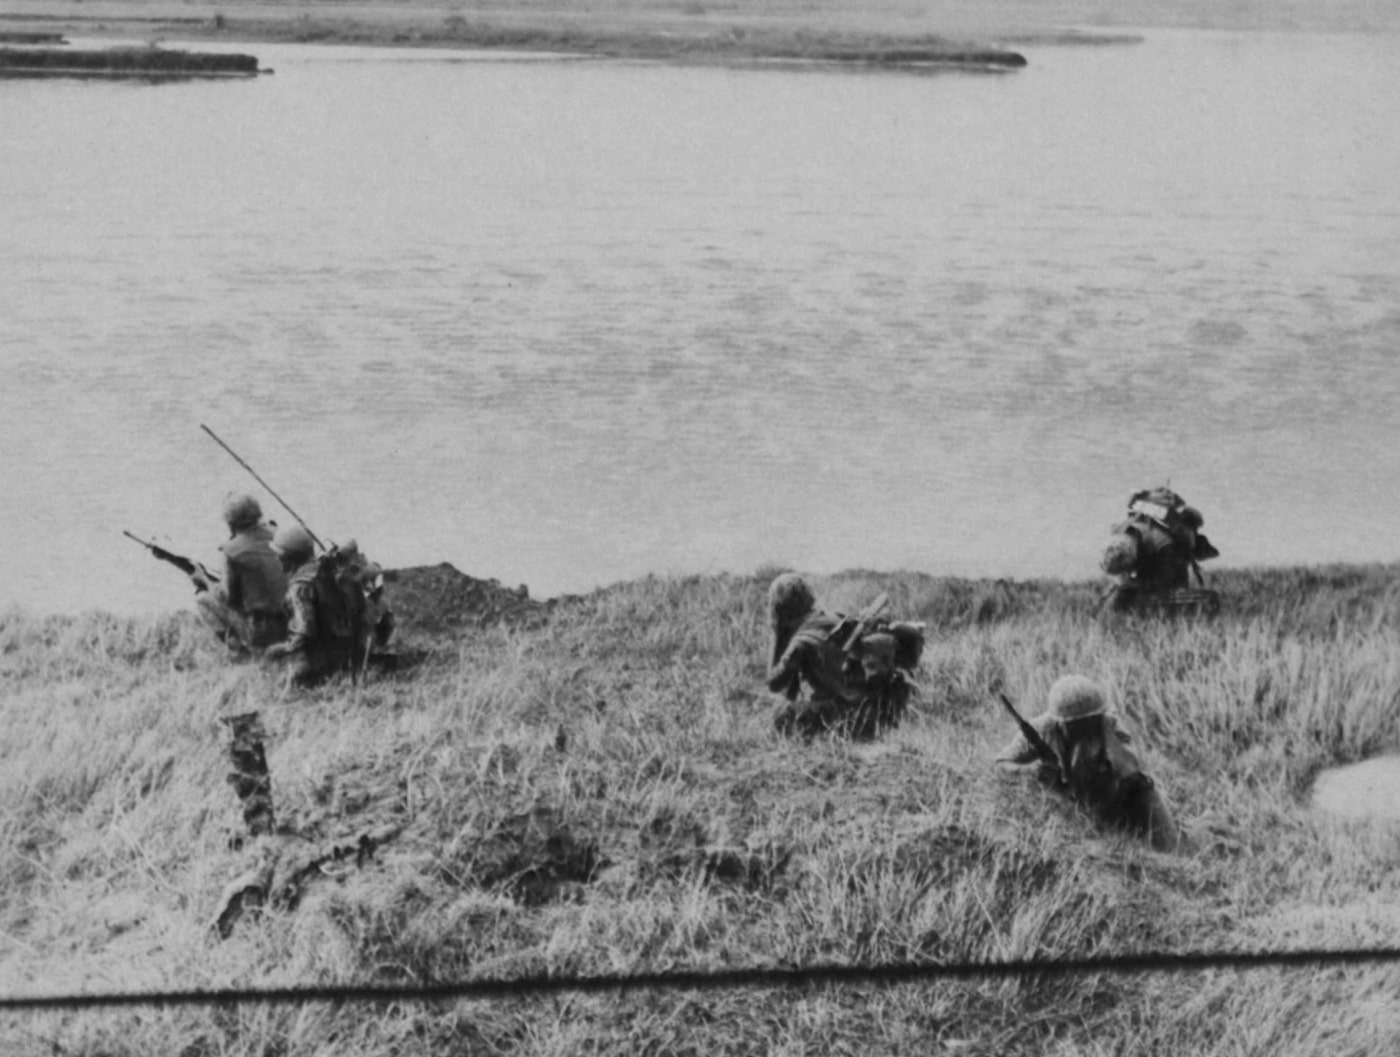 Republic of Korea Marines set up a hasty defense perimeter on Barrier Island, 12 miles southeast of Da Nang. The Marines were inserted by helicopters to search for the enemy. Image: Cpl. C. R. White/USMC